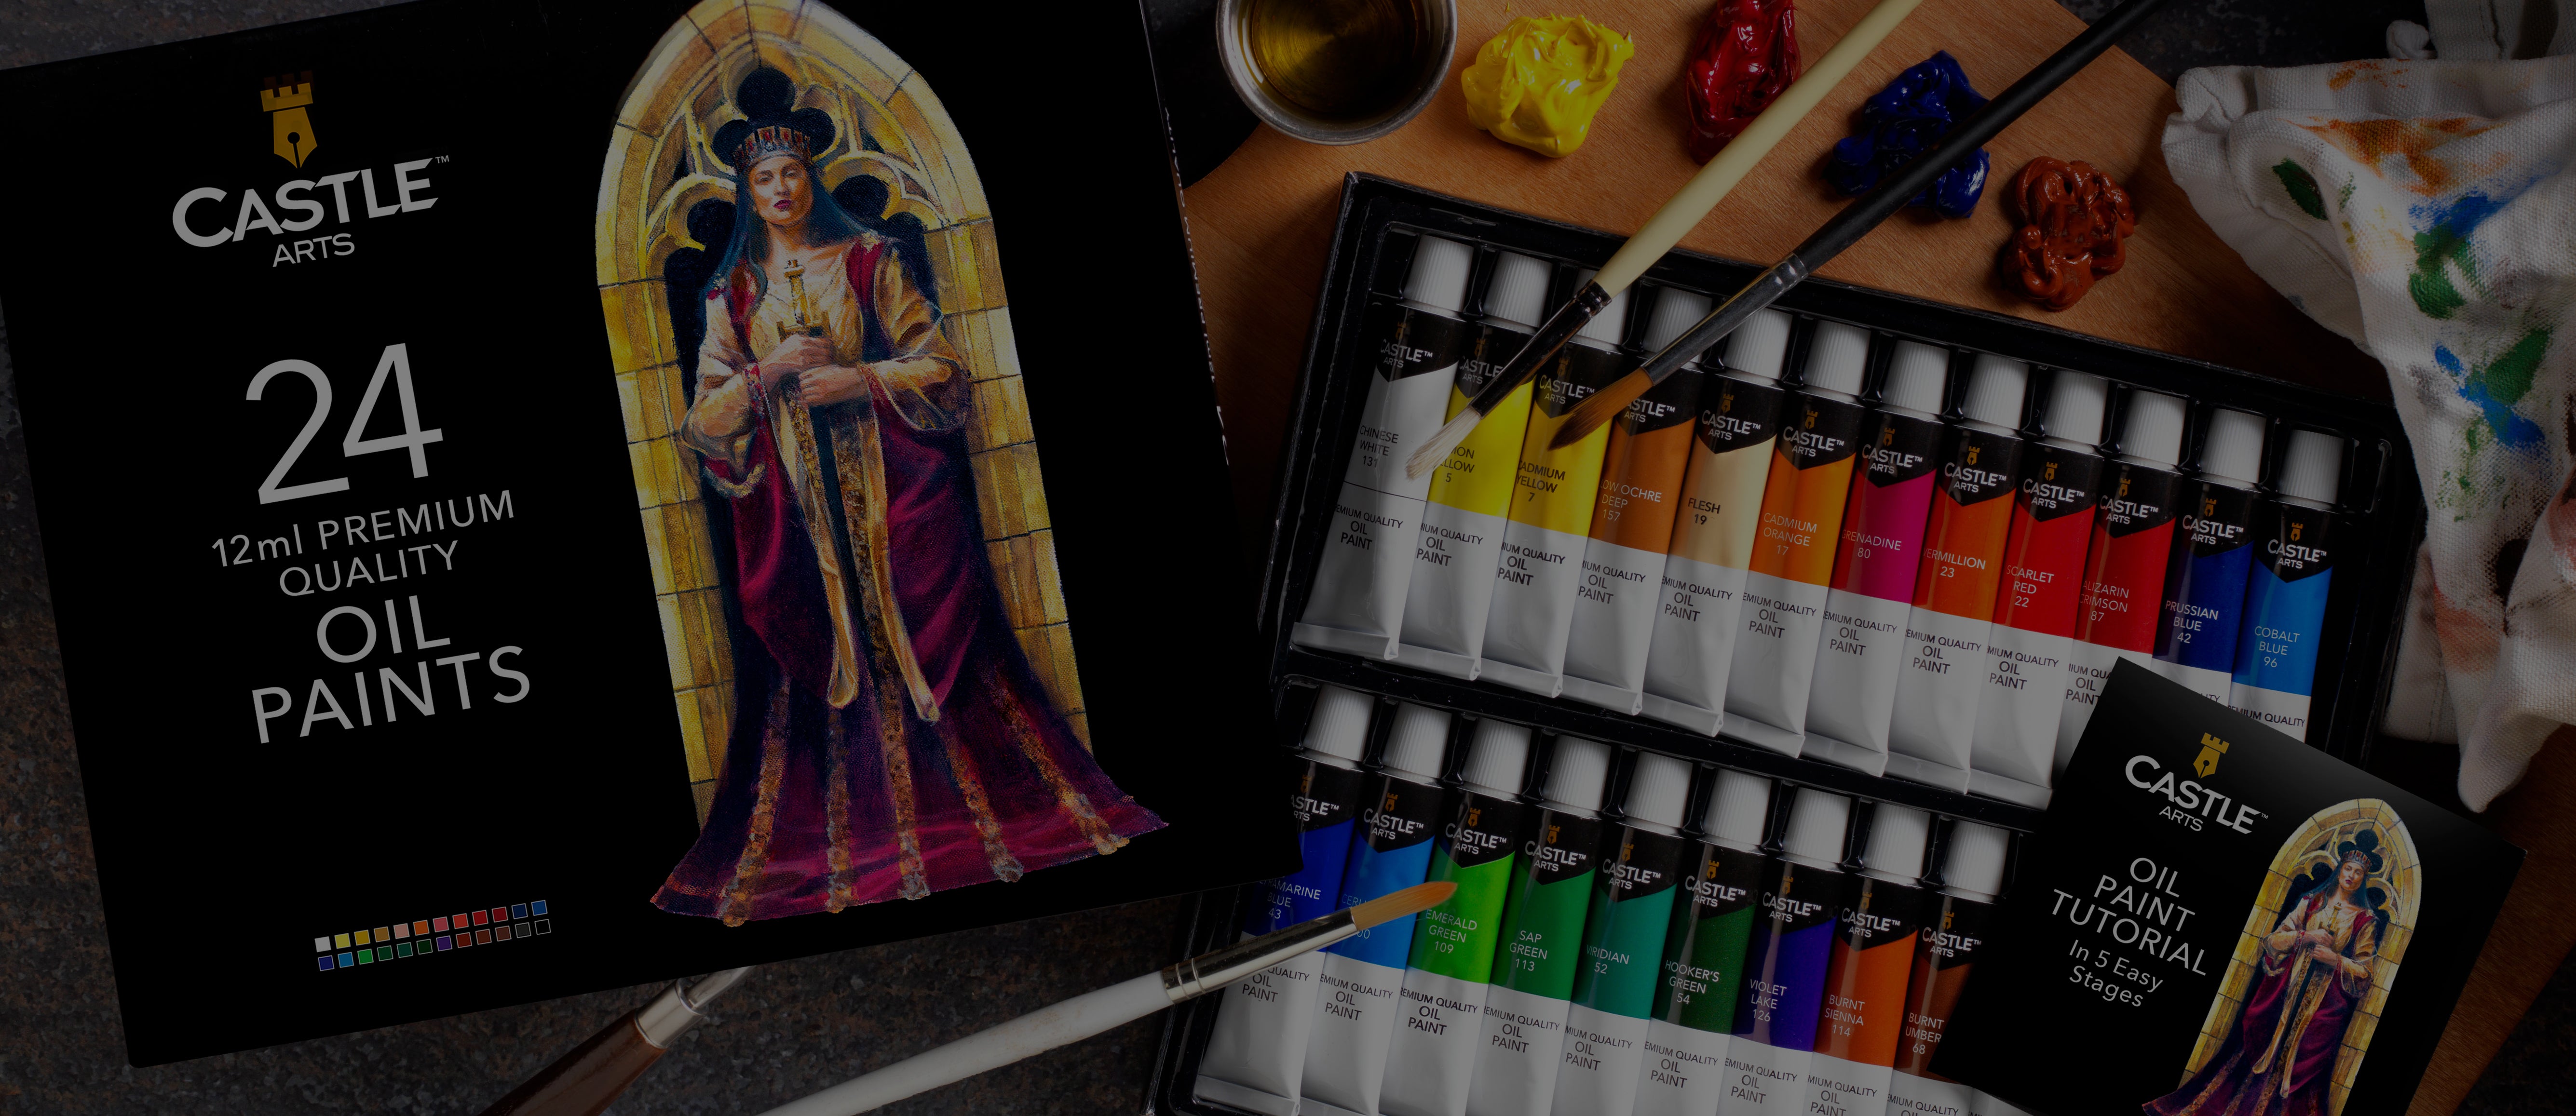 Oil Paint Set for Adults and Kids - Oil Painting Art Kits Supplies wit –  KEFF Creations